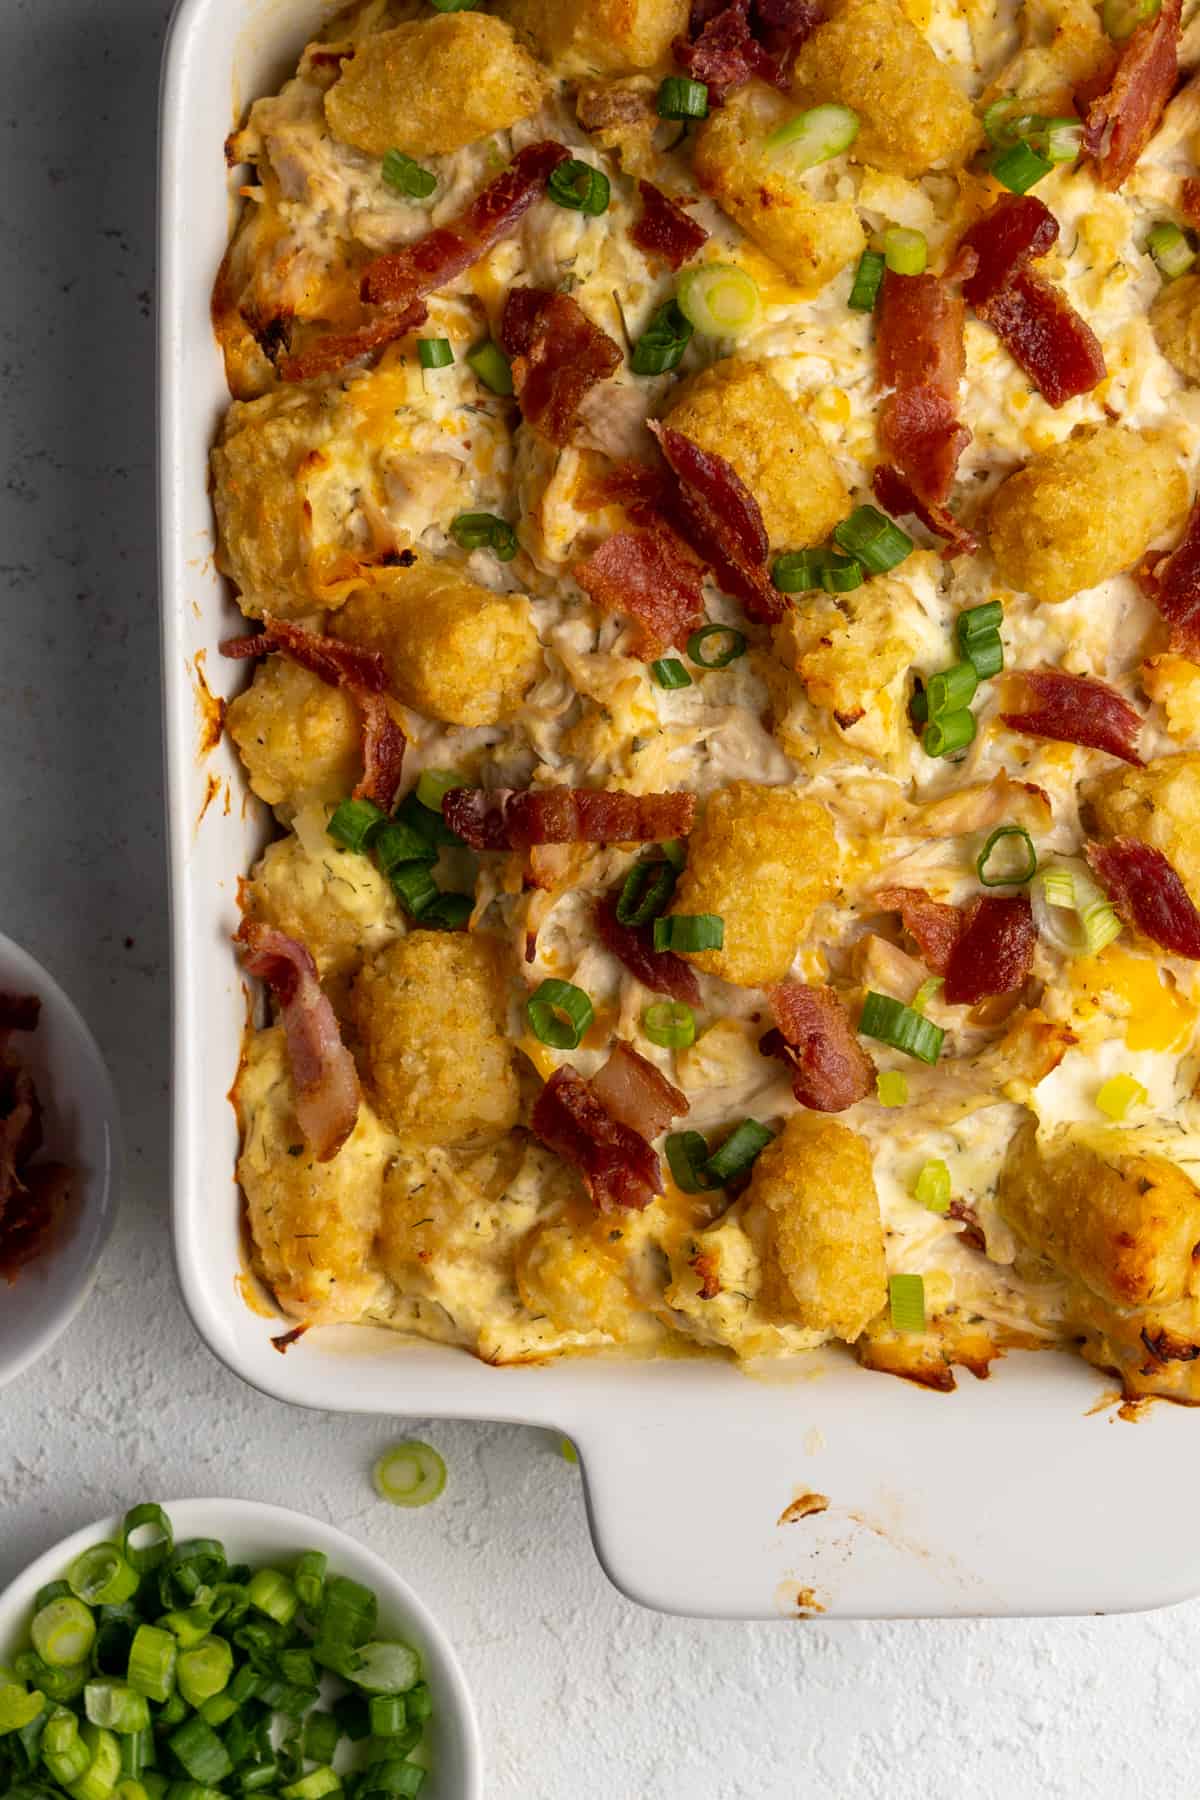 Cracked Out Tater Tot Casserole